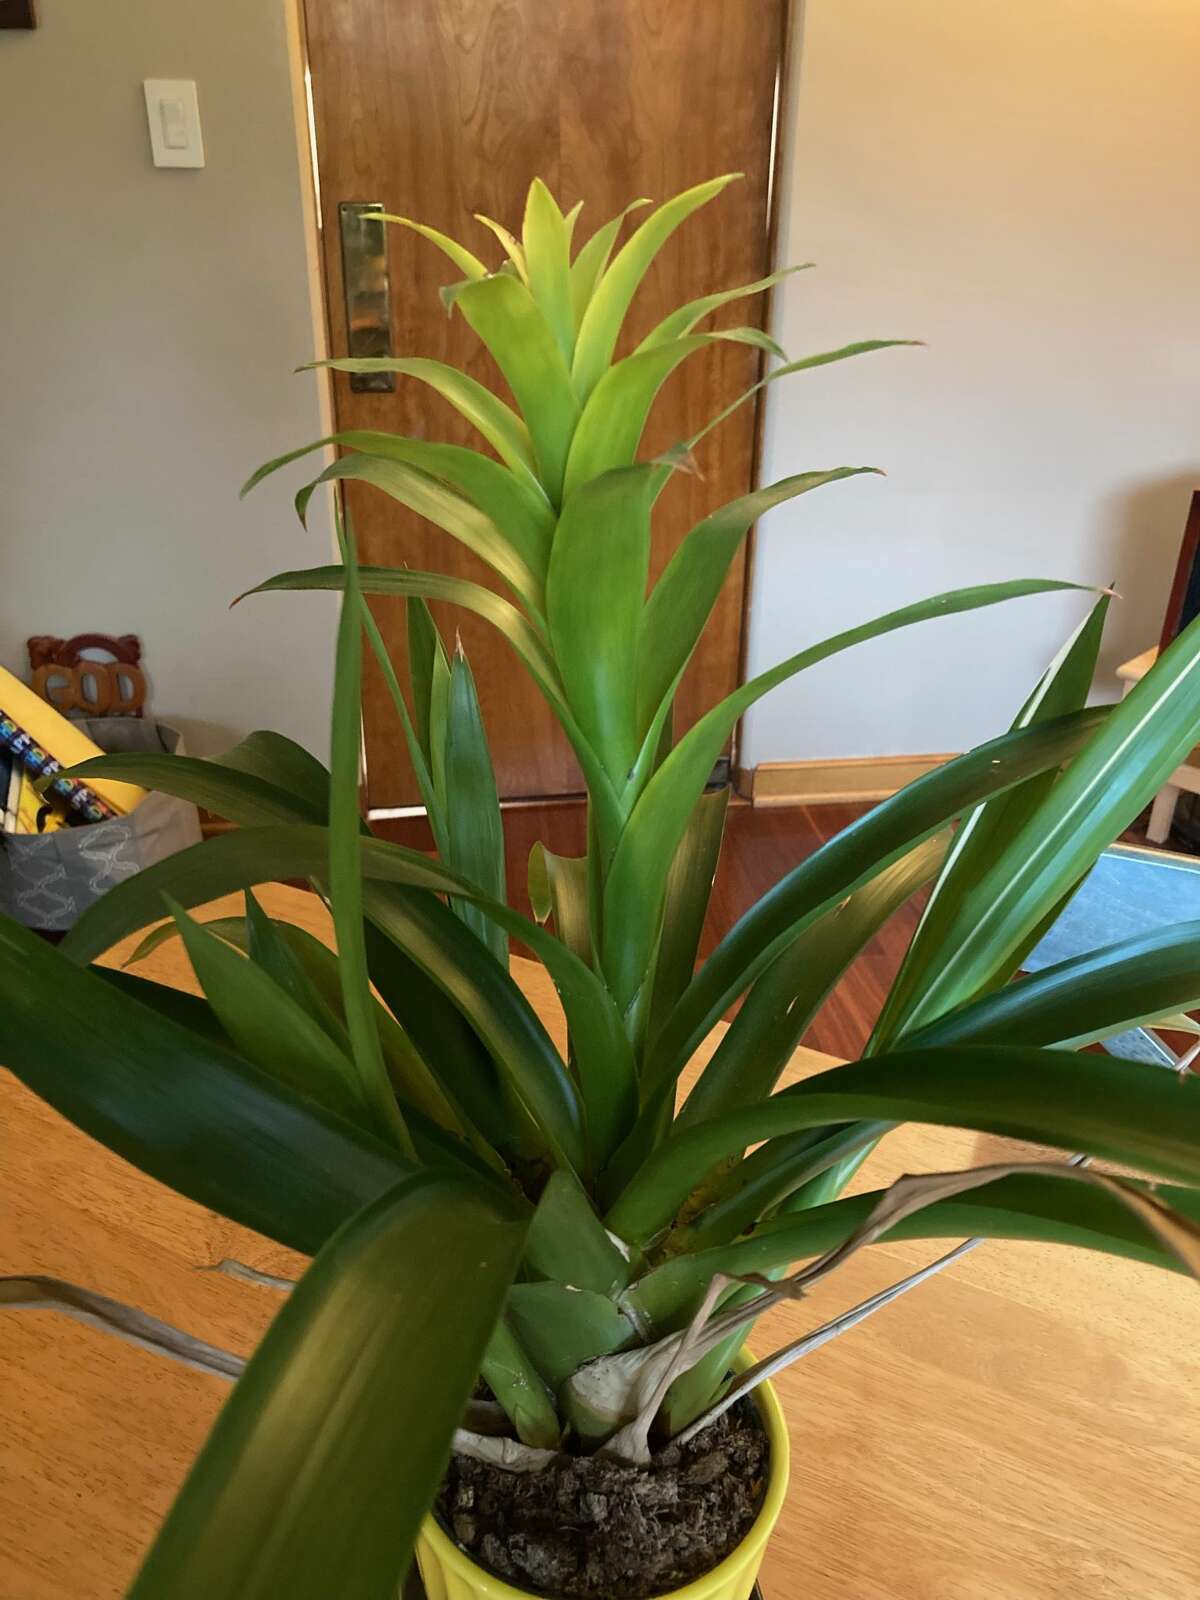 My now-mature bromeliad, purchased in April from Meijer. The top eight inches of the inflorescence has faded recently from a clear neon yellow. The pups can be seen at each side, more narrow and sword-like than the foliage.  